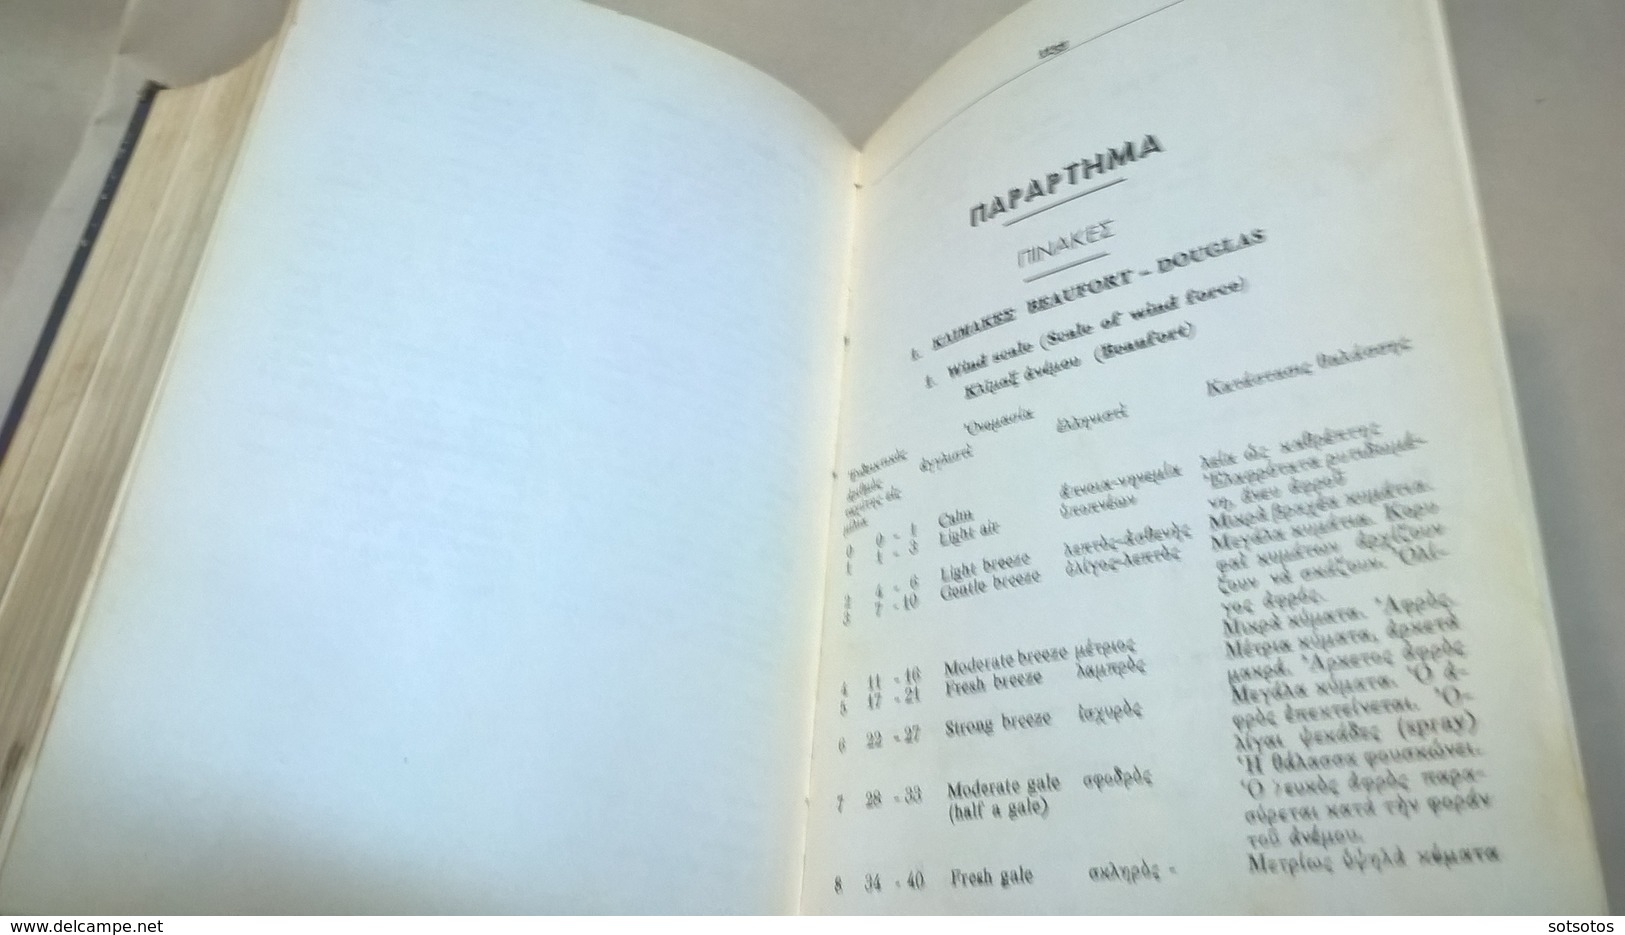 ENGLISH-GREEK DICTIONARY of MARINE NAUTICAL AND TECHNICAL TERMS :K. KAMARINOS (1963) 1176 pages - in very good con